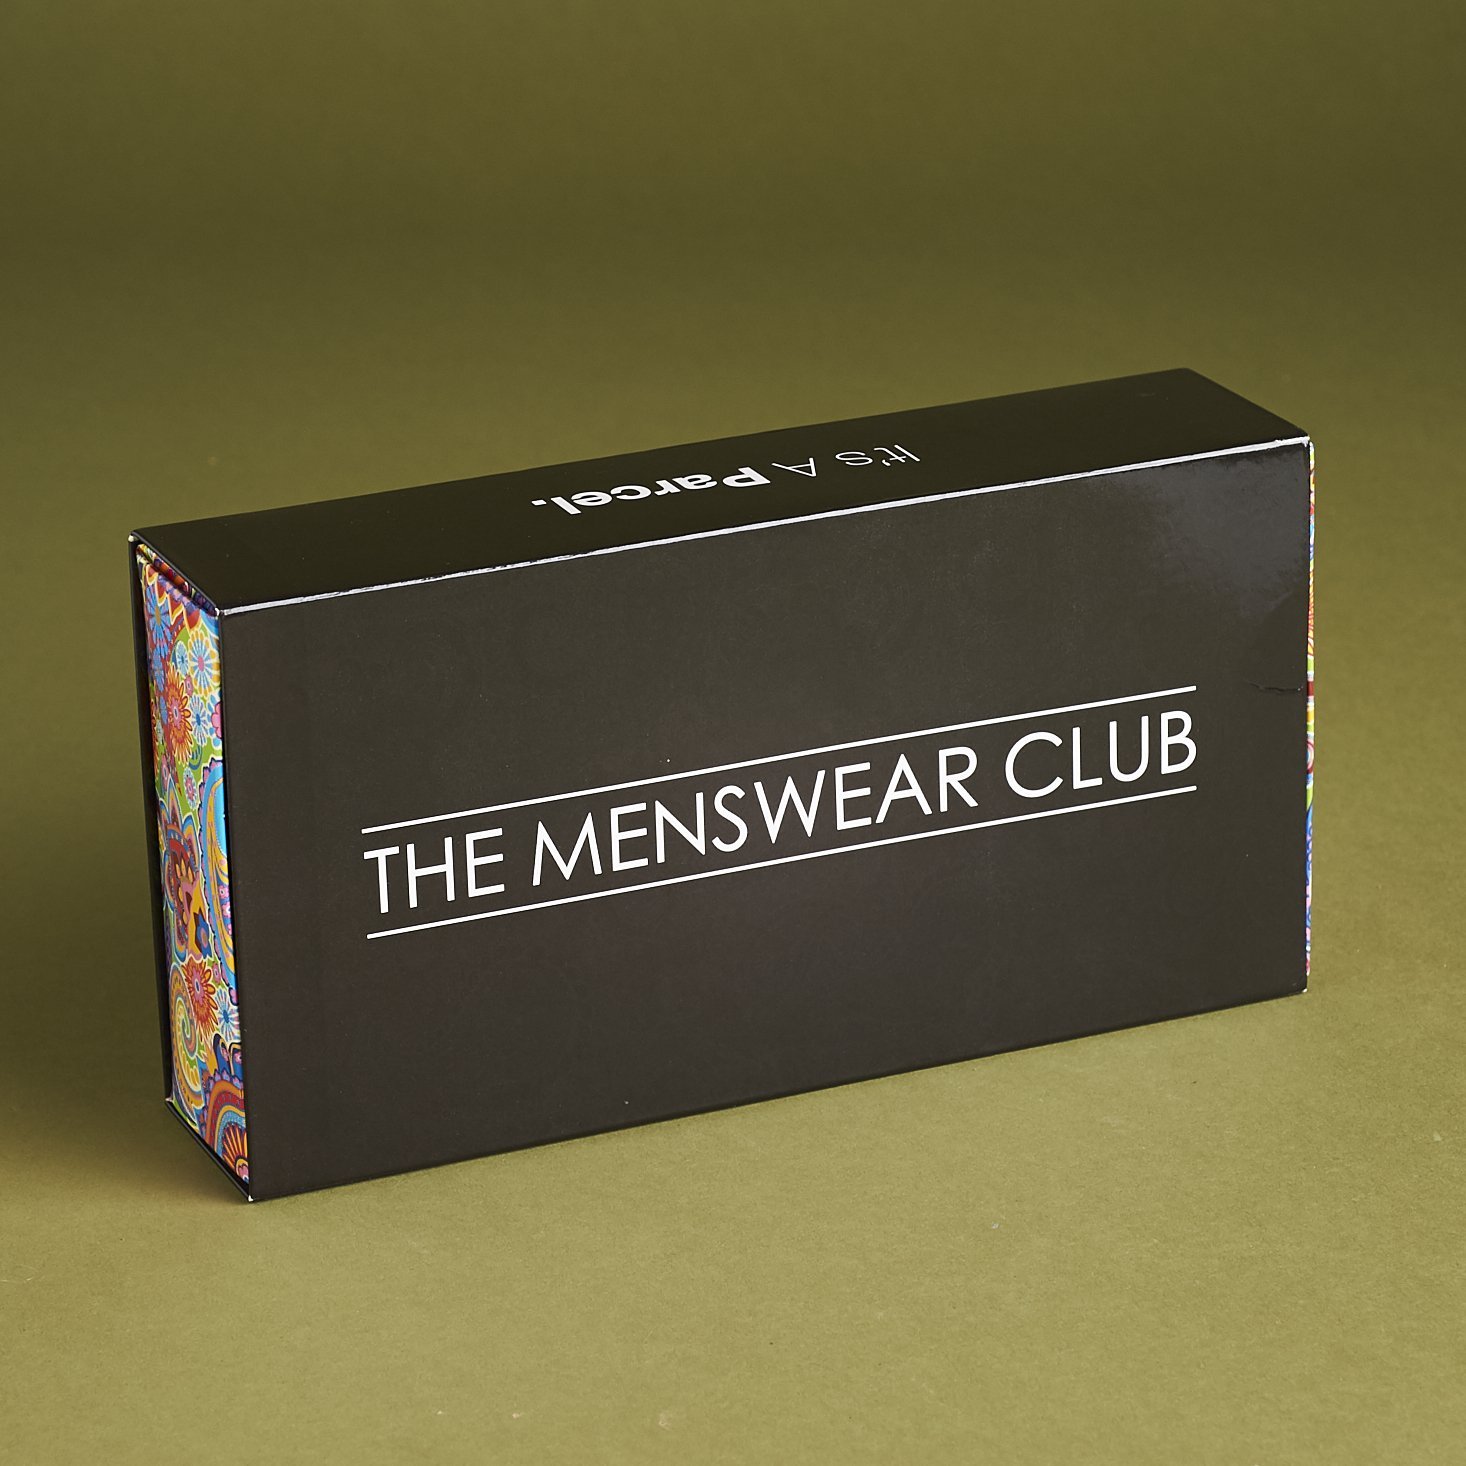 The Menswear Club Offer – Choose Your Free Gift with Subscription!